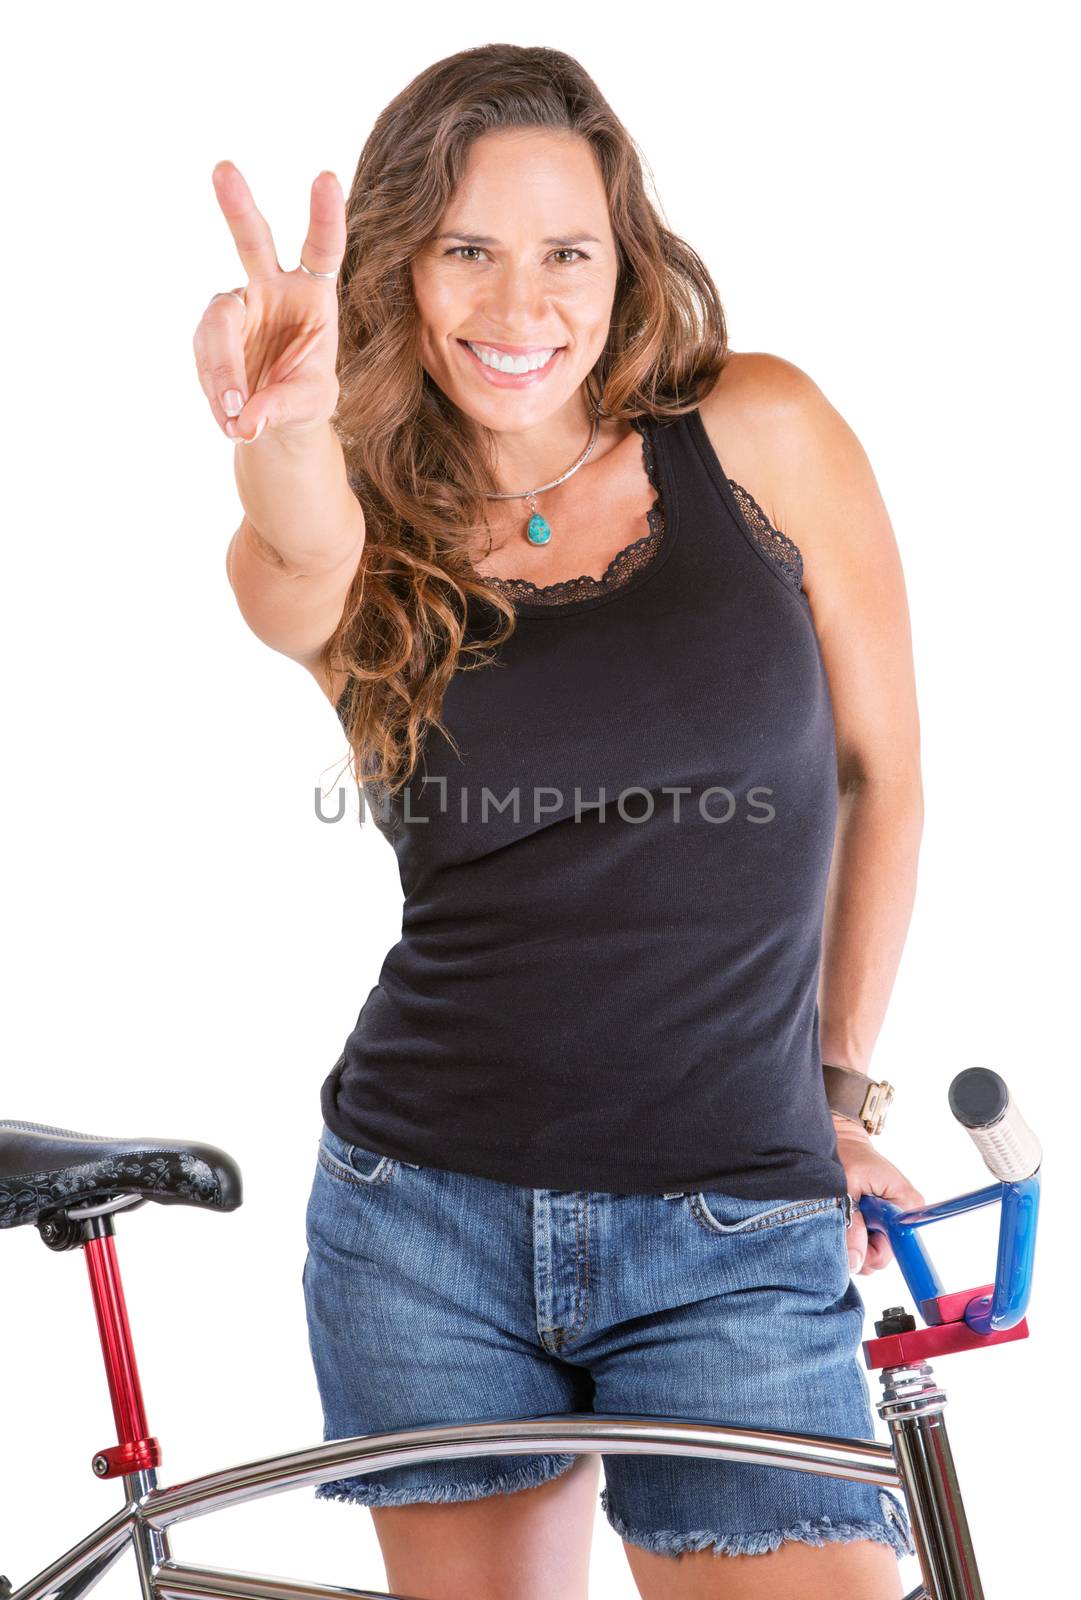 Isolated cute woman gesturing victor symbol with her bike